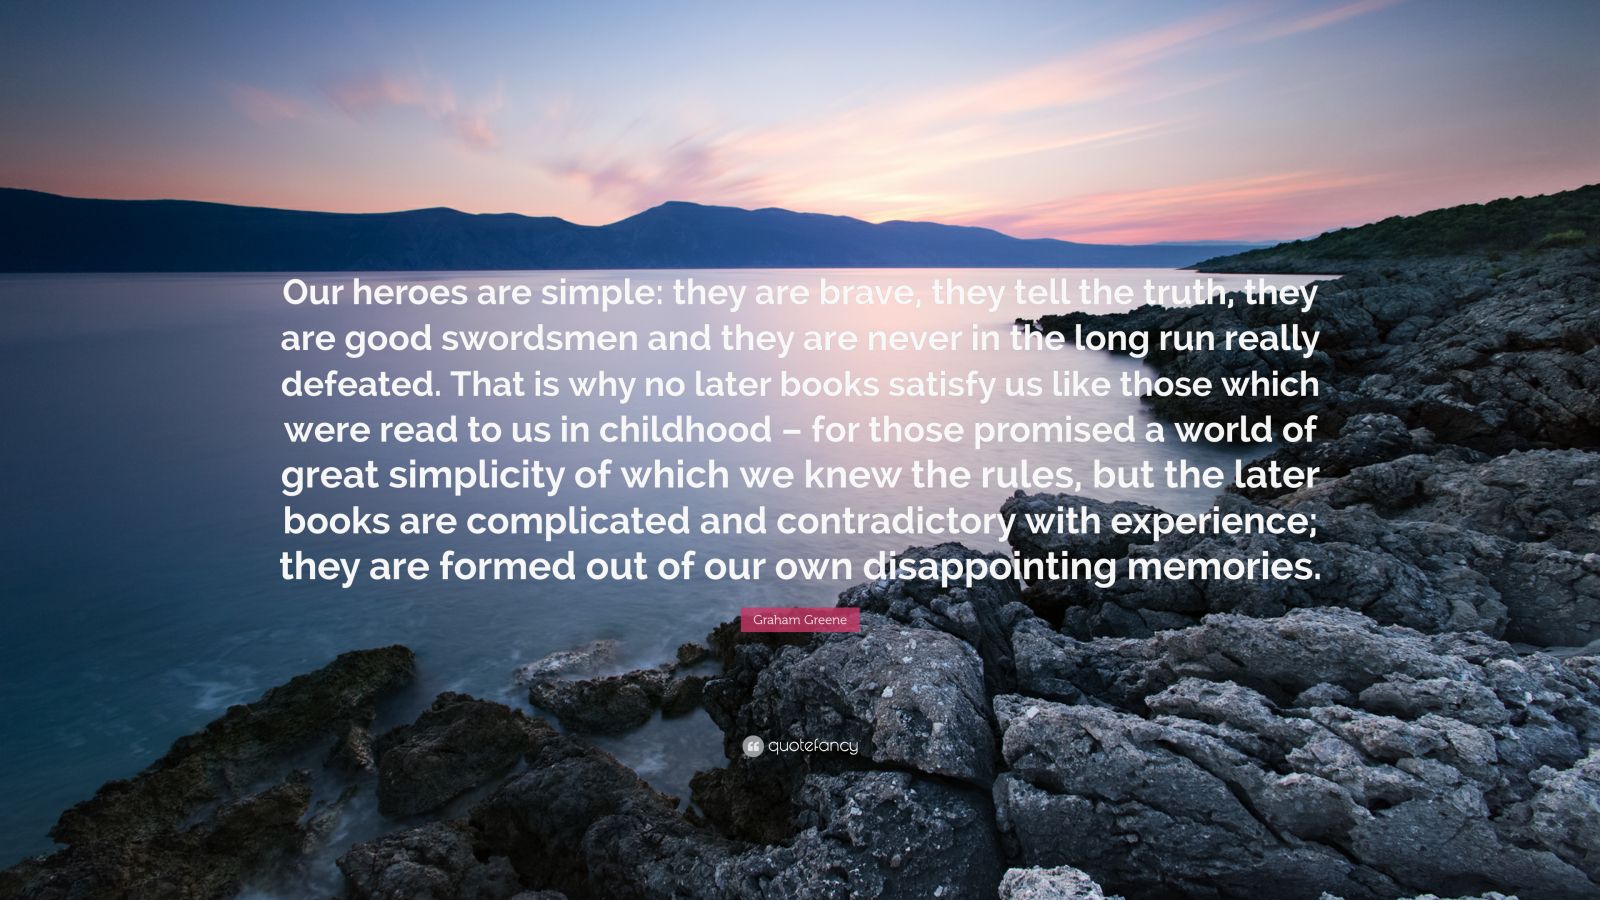 Graham Greene Quote: “Our heroes are simple: they are brave, they tell ...